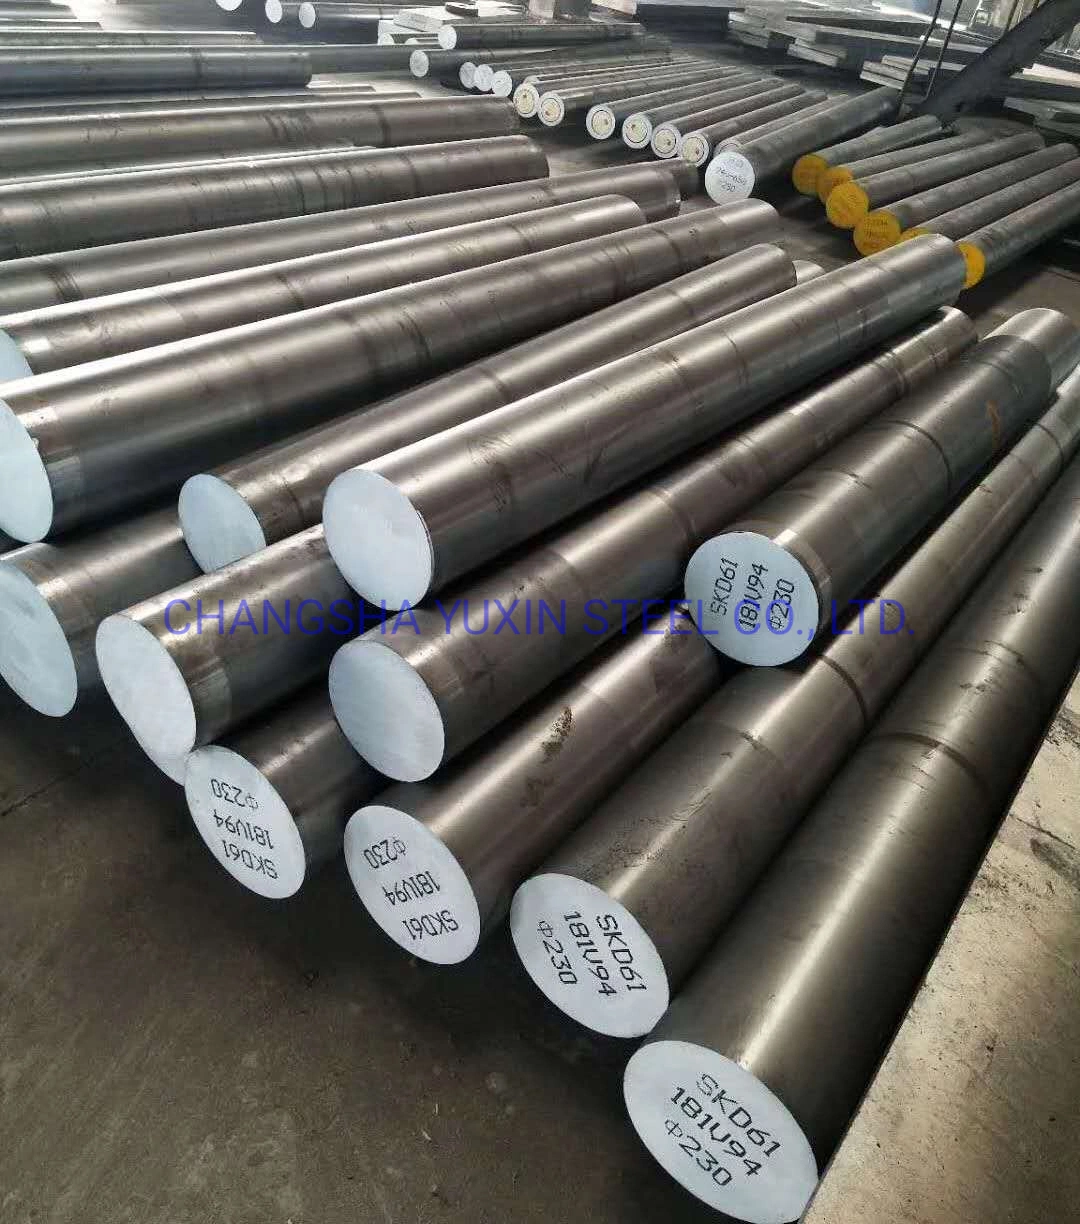 Special Alloy Tool Steel in Round Square Flat Bar, Plate, Block Shapes. 1.2714, 1.2367, 1.2316